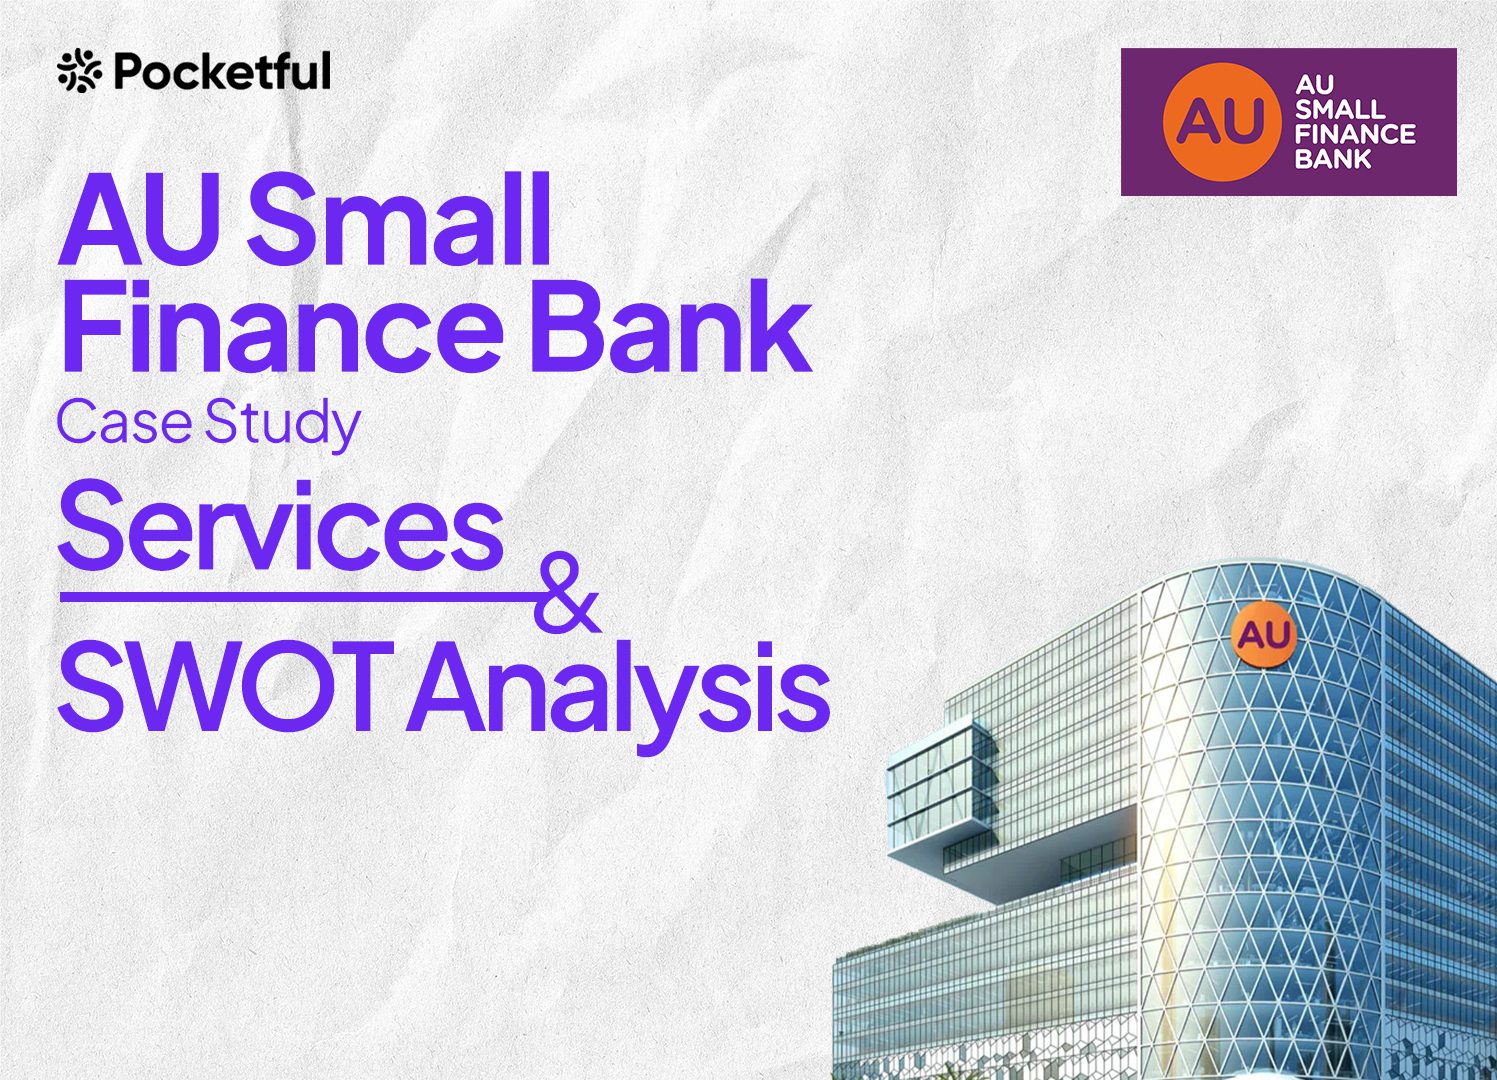 AU Small Finance Bank Case Study: Services, Performance, Financials, and SWOT Analysis.